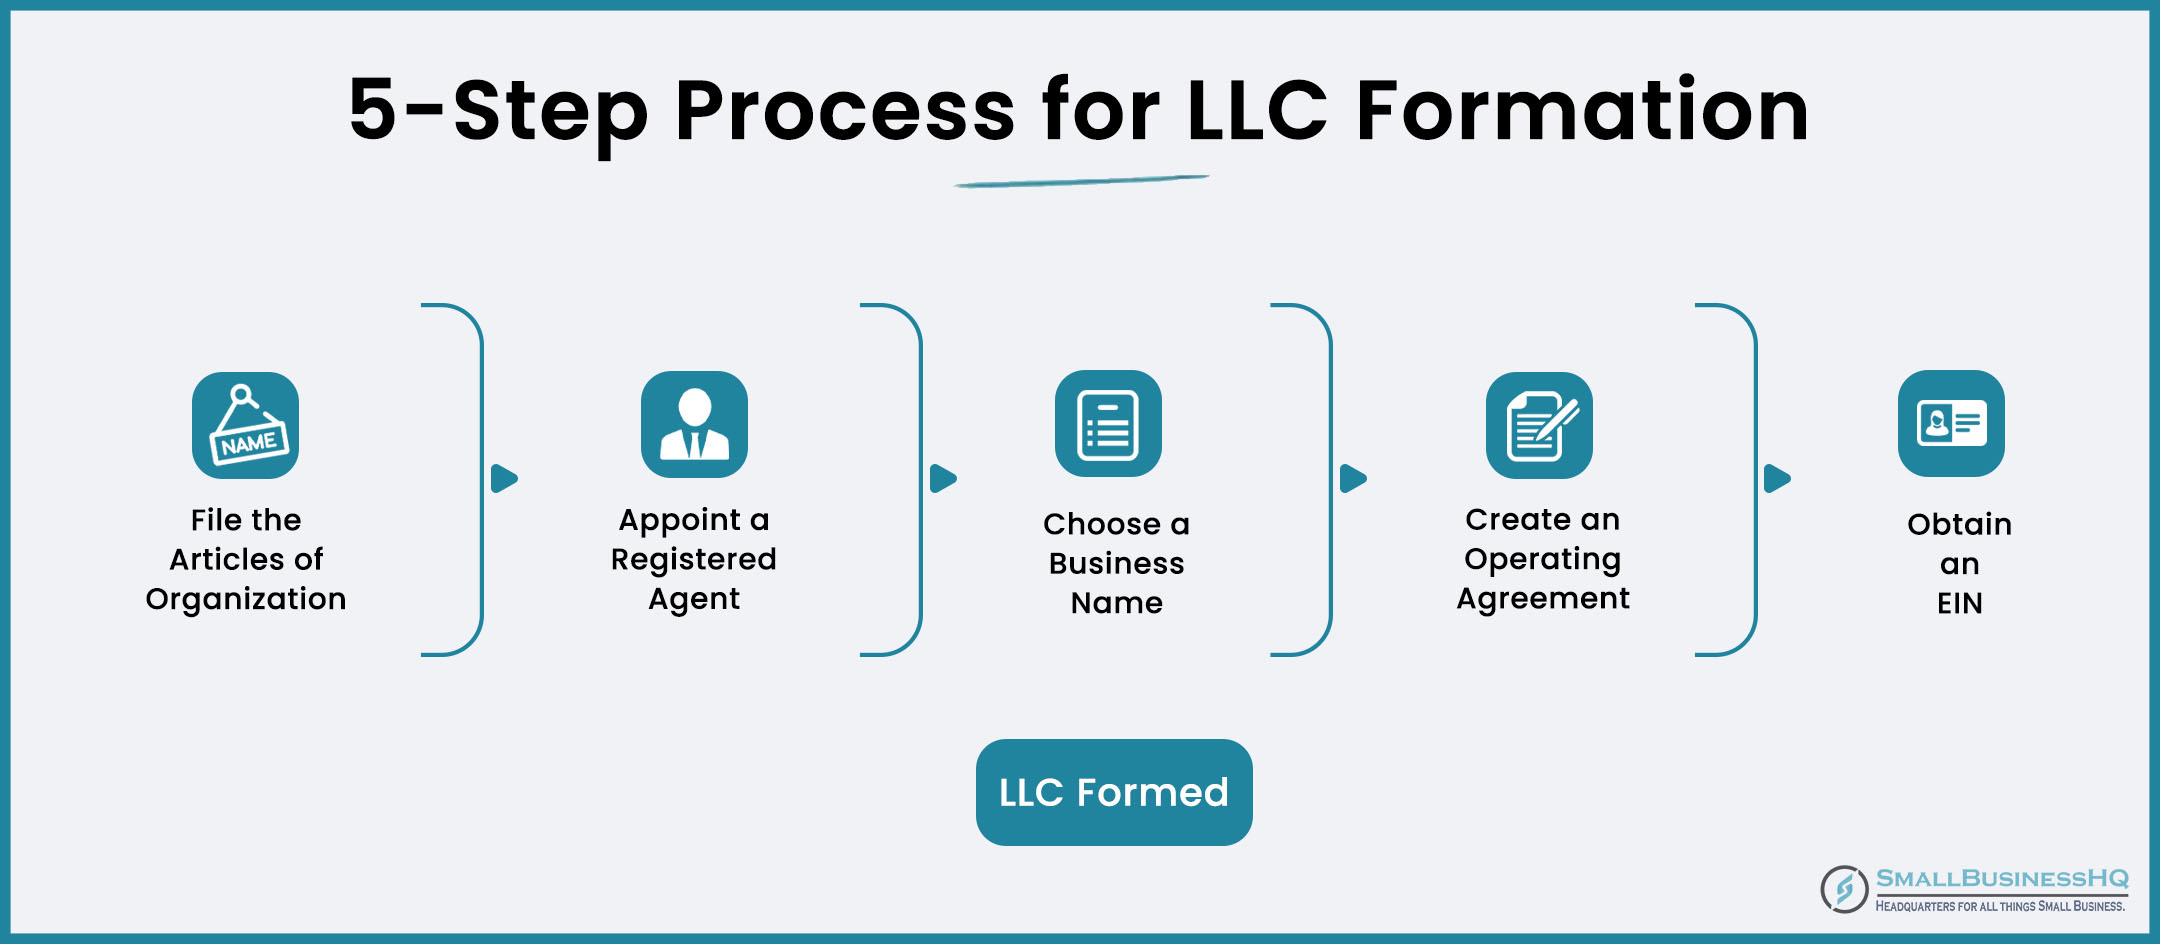 5-Step Process for LLC Formation1